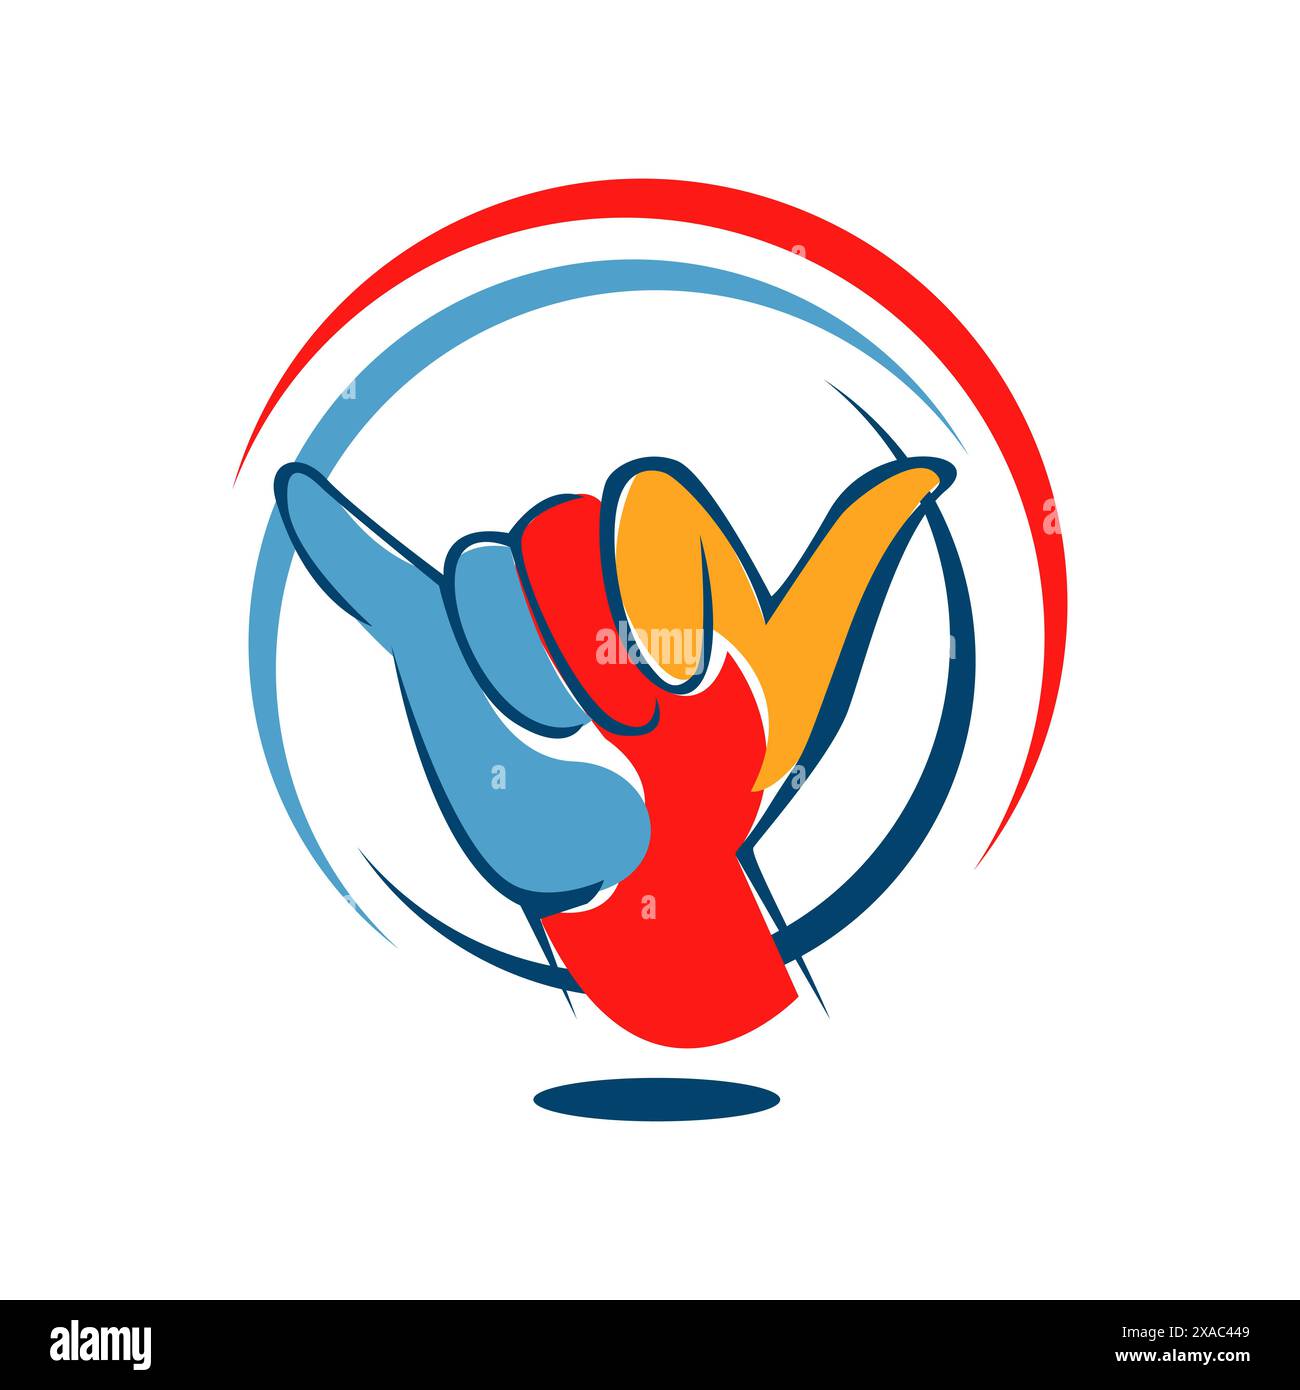 The Shaka Sign logo vector design captures the essence of the iconic hand gesture that symbolizes the spirit of aloha and positive vibes. This unique Stock Vector